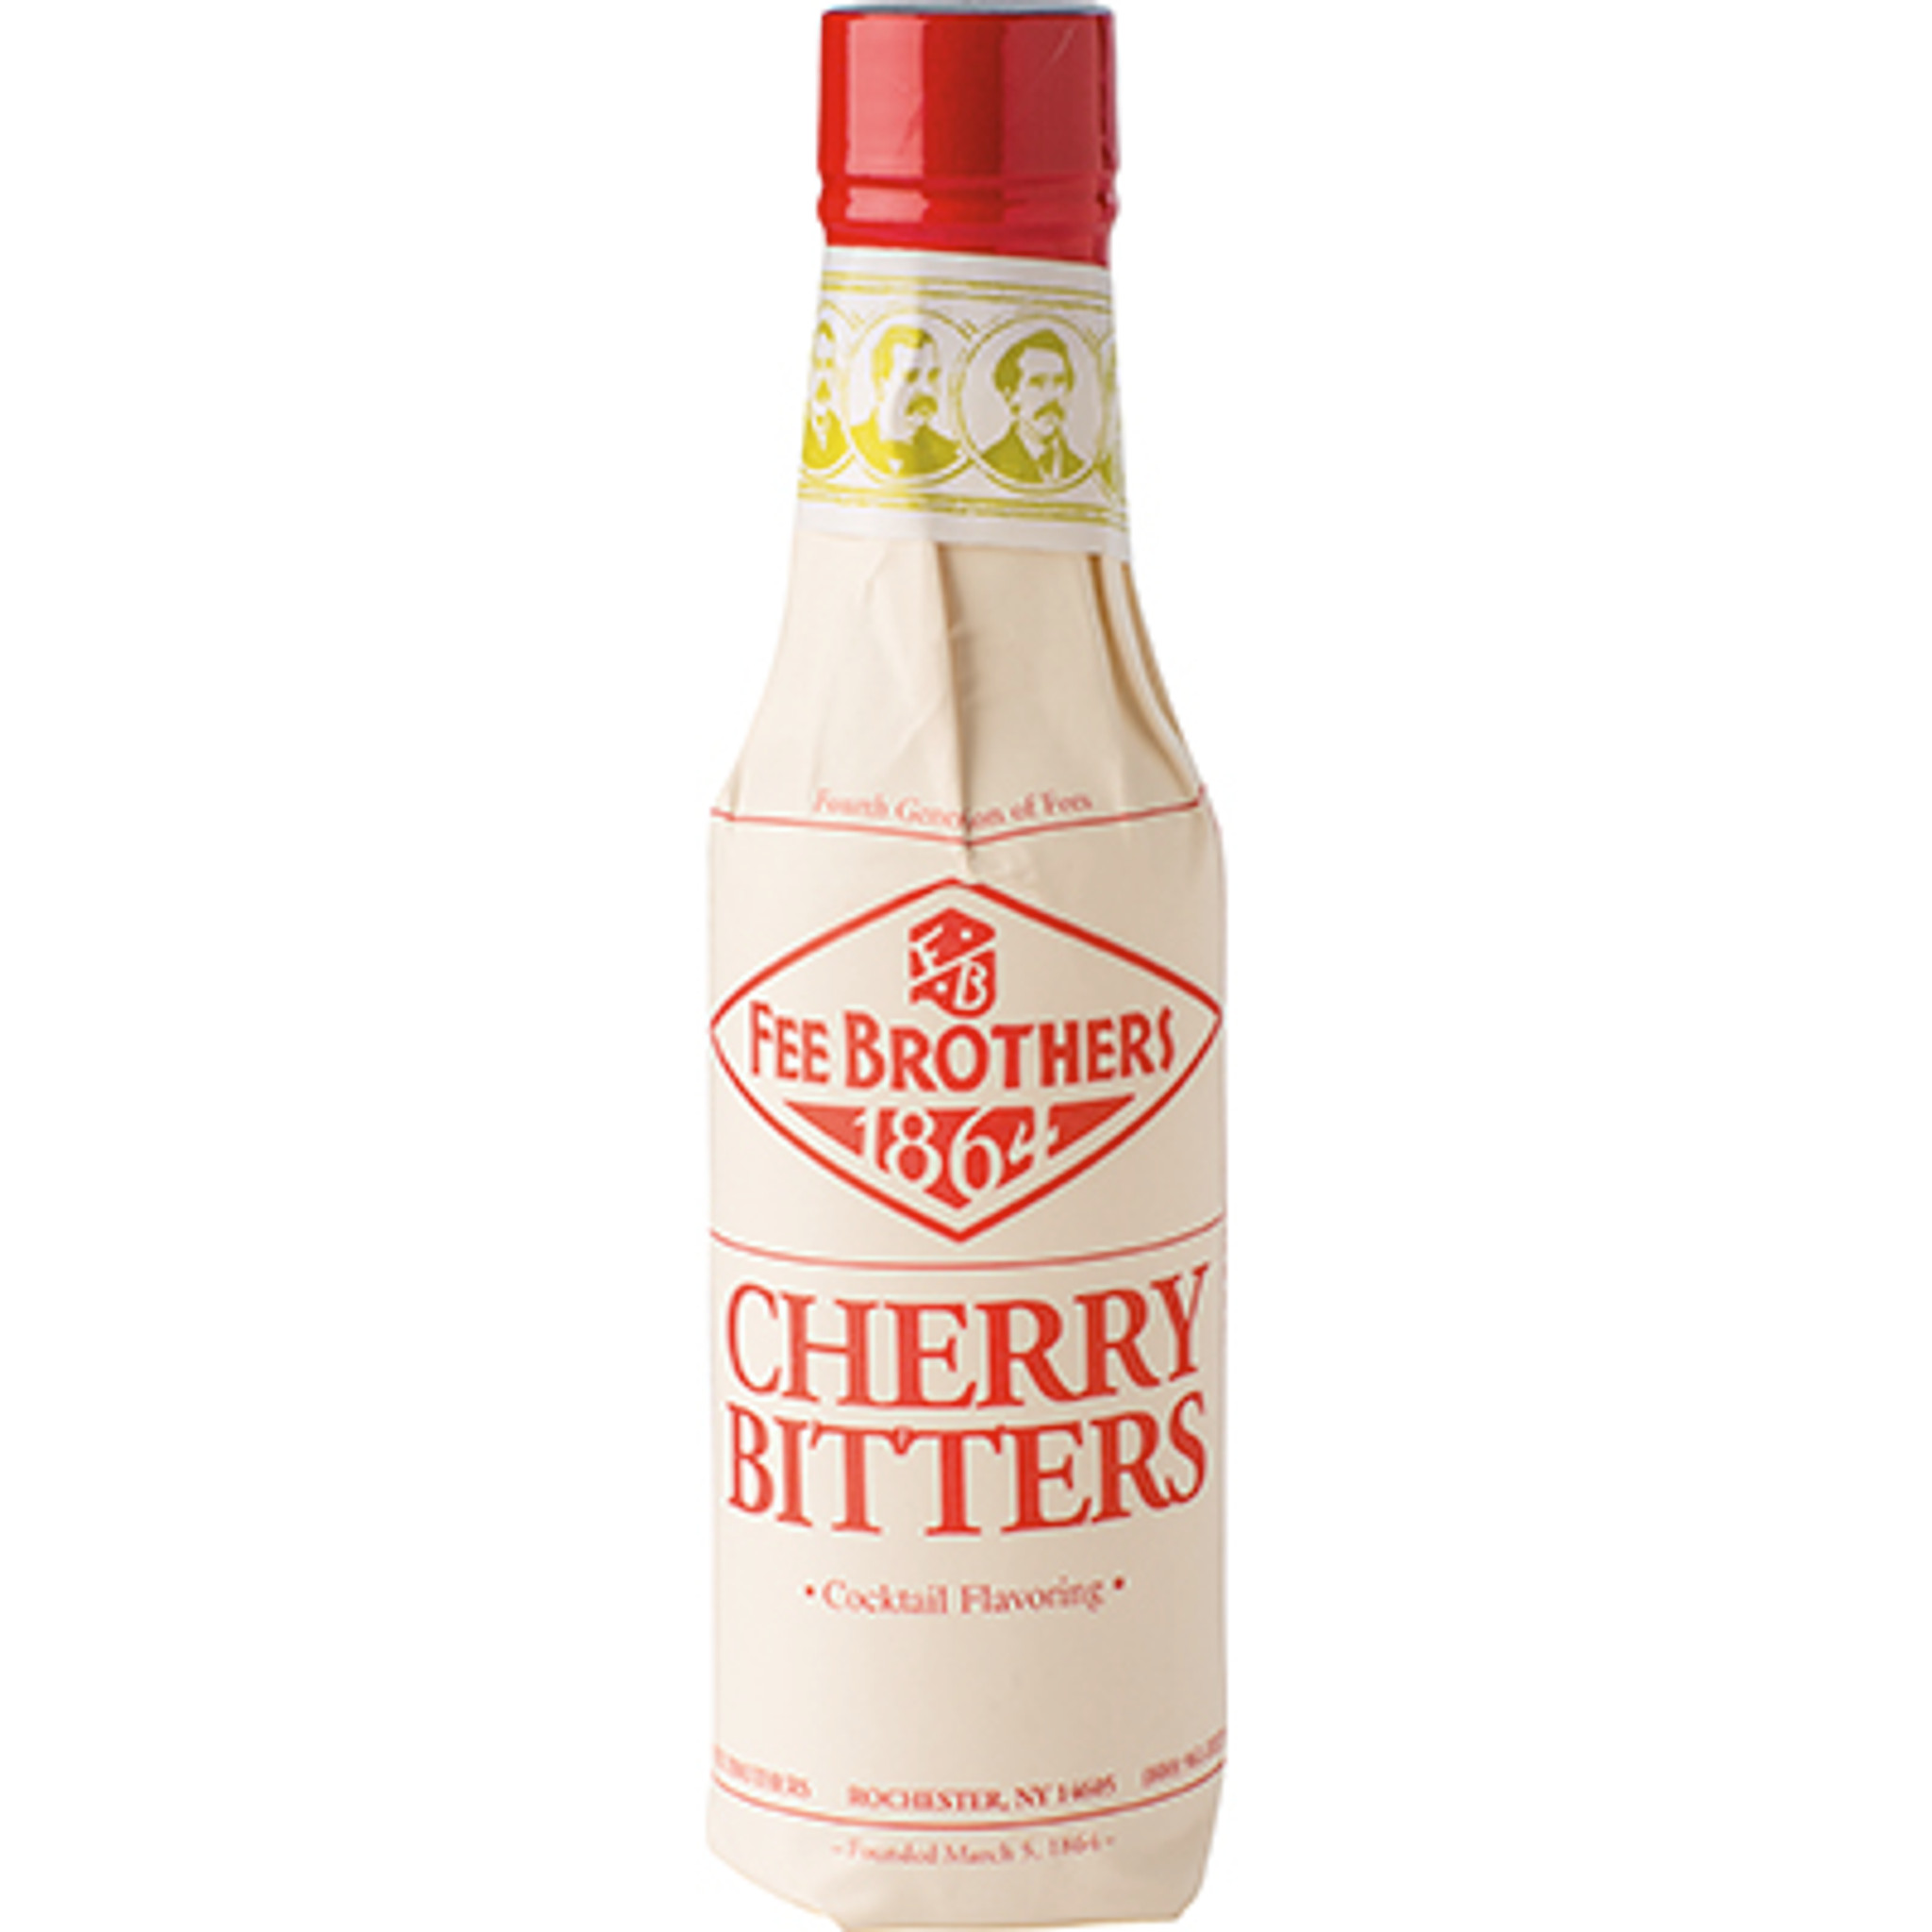 Fee Brothers Cherry Bitters - The House of Glunz